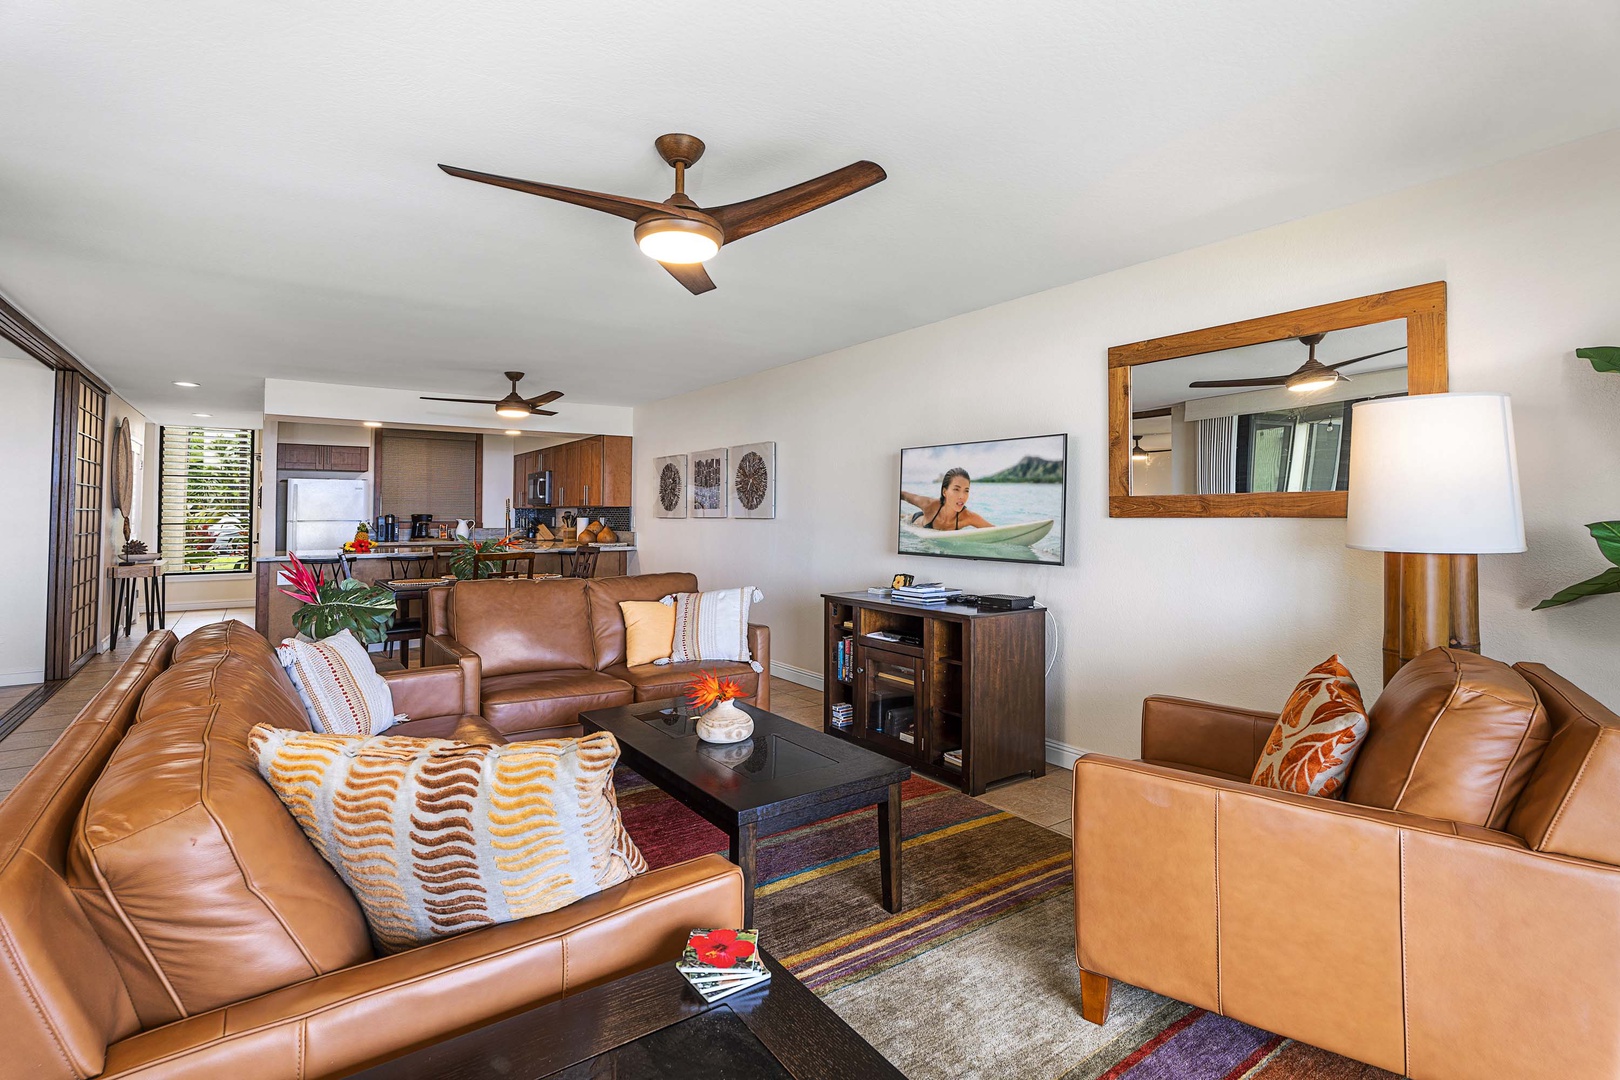 Kailua Kona Vacation Rentals, Keauhou Kona Surf & Racquet 2101 - Open floorplan is one of the feature of the home for a seamless invites light, flow, and shared moments.